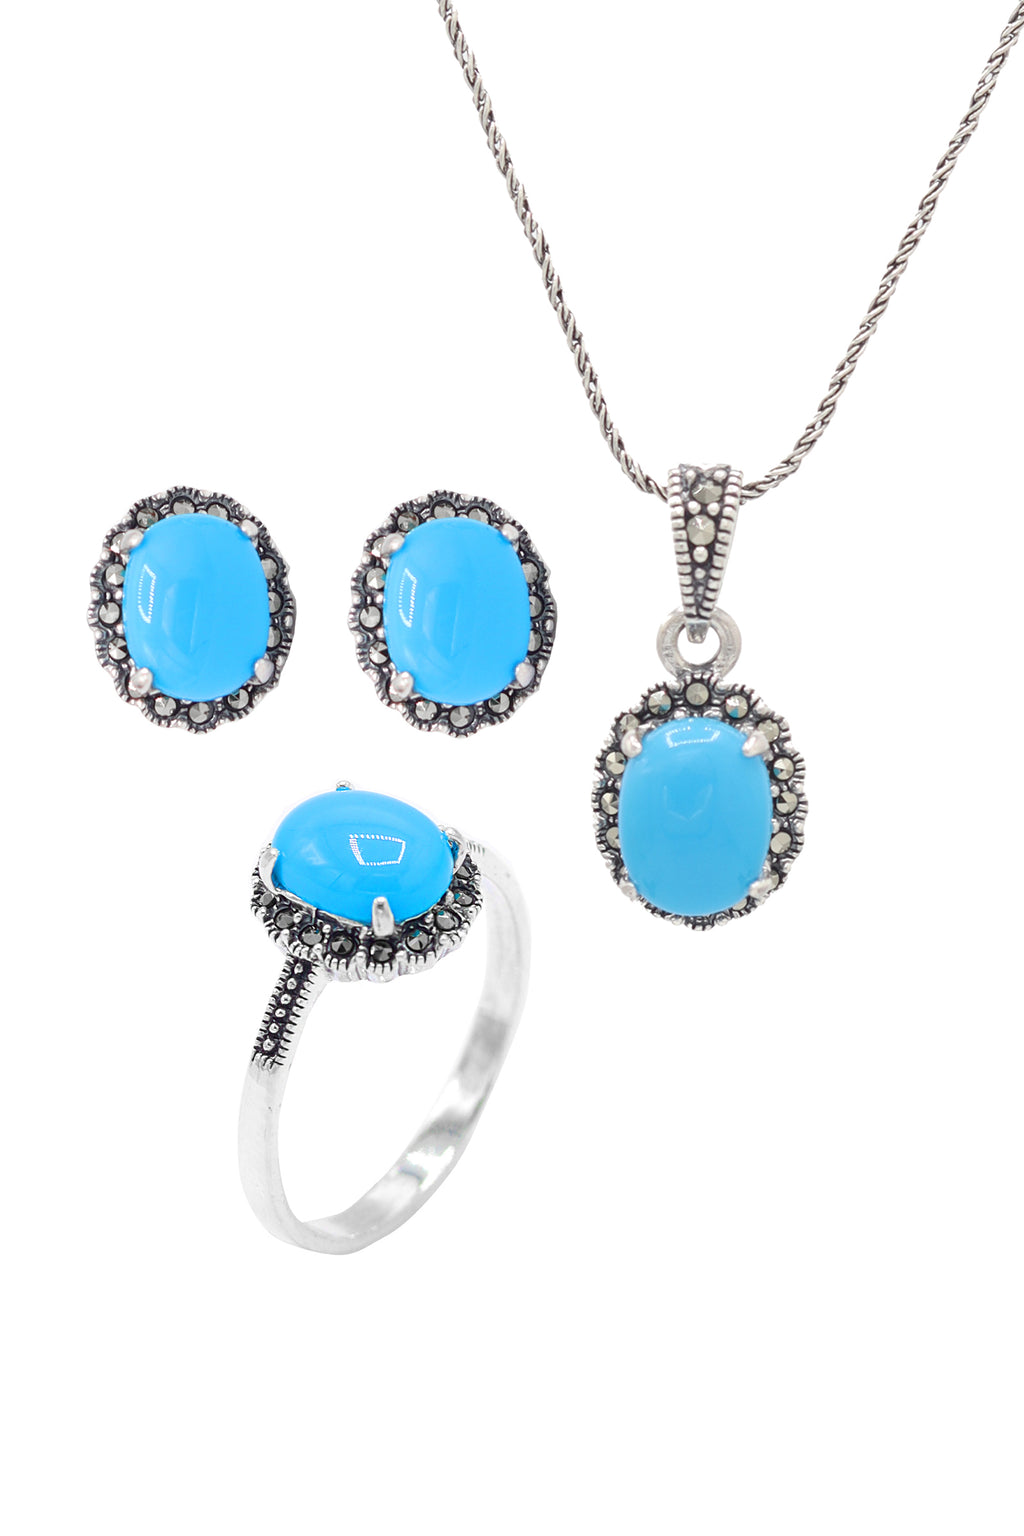 Oval Model Silver Triple Jewelry Set With Turquoise (NG201021925)